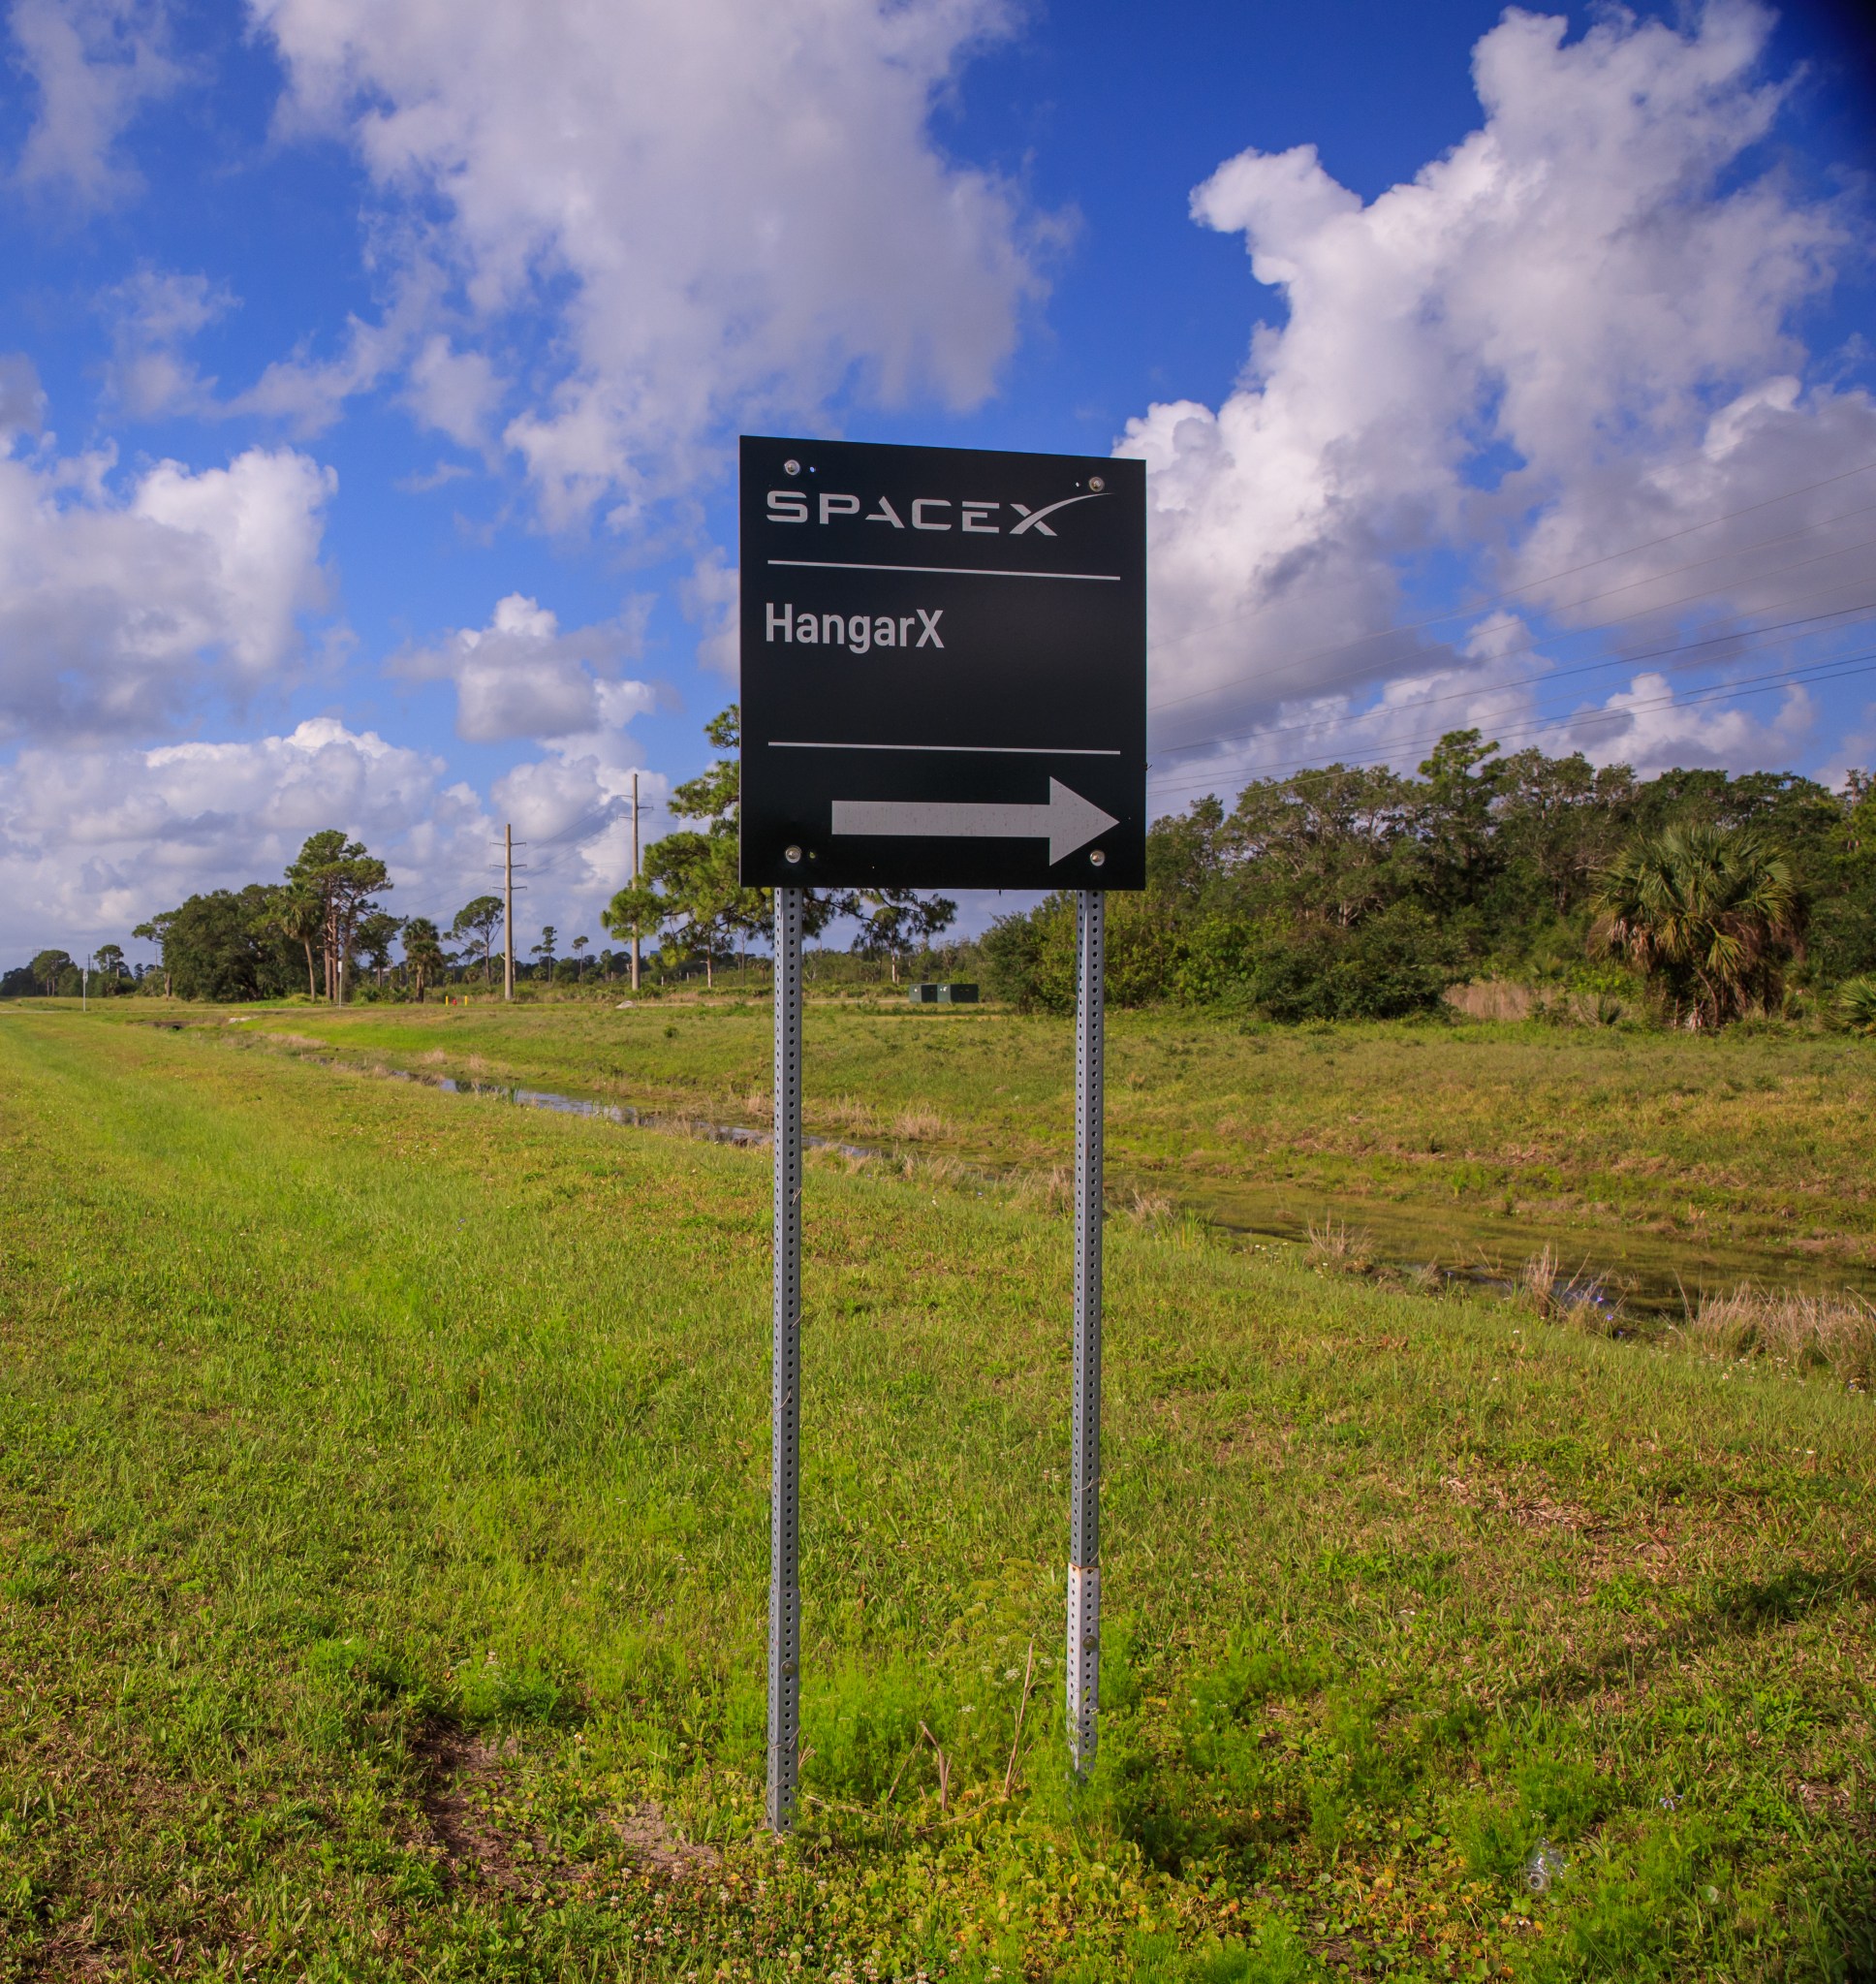 SpaceX's proposal requests expanding the area on Roberts Road near its existing facilities